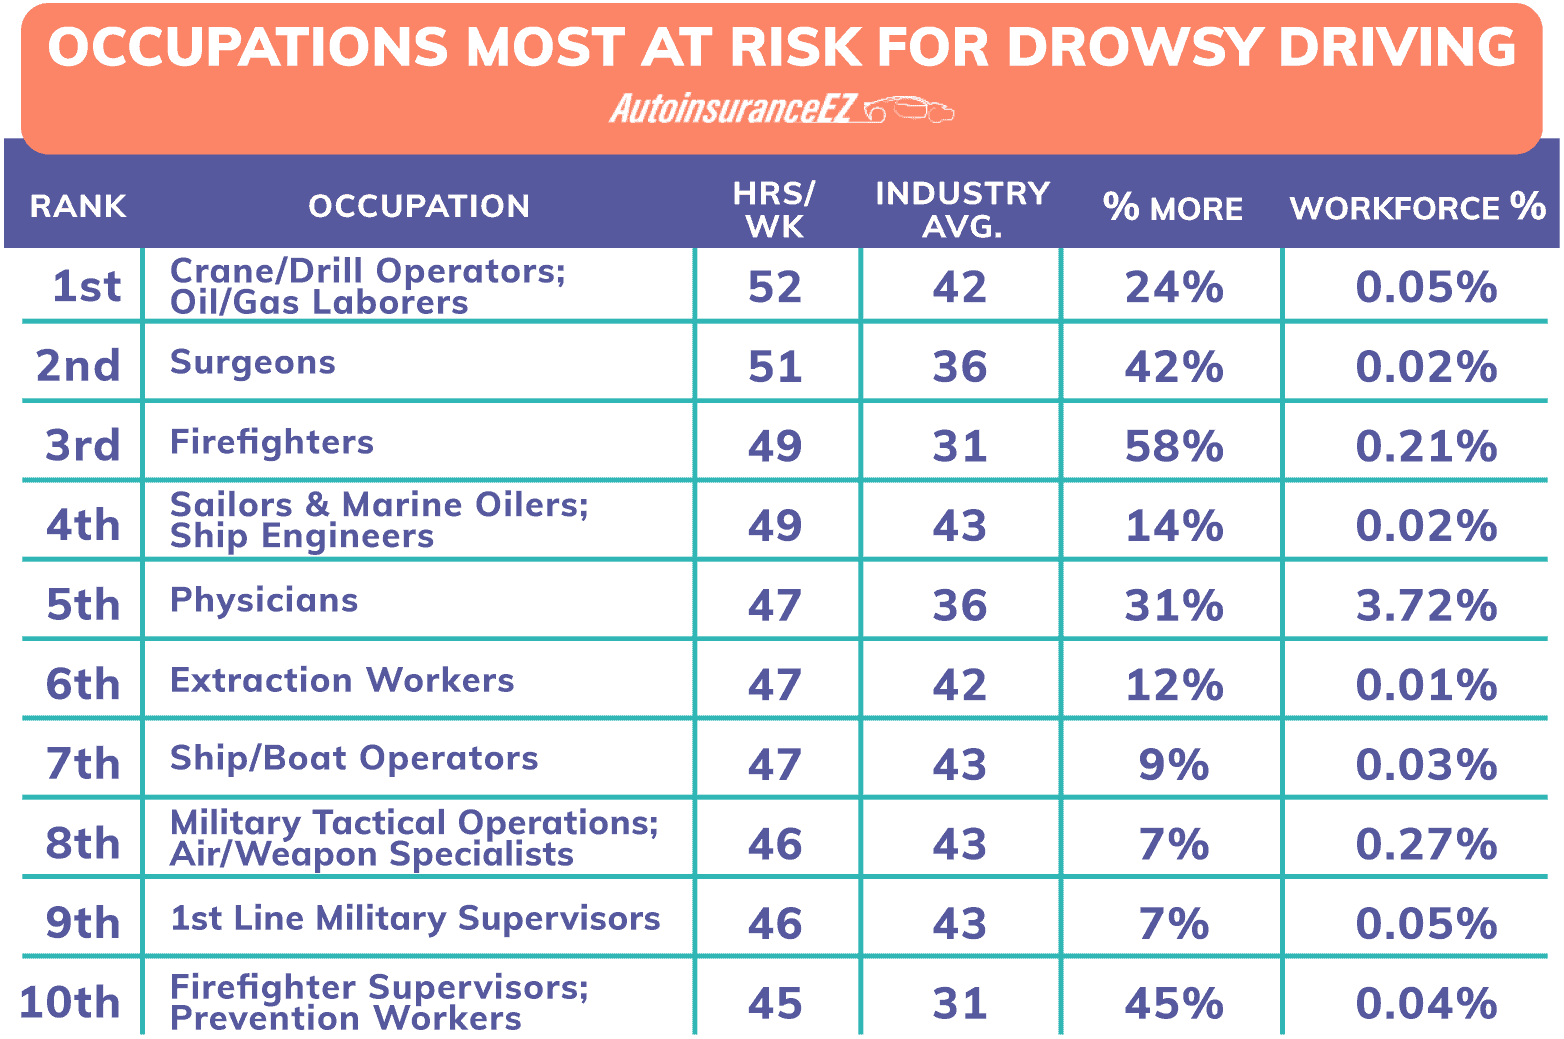 An illustration lists occupations at higher risk for drowsy driving.